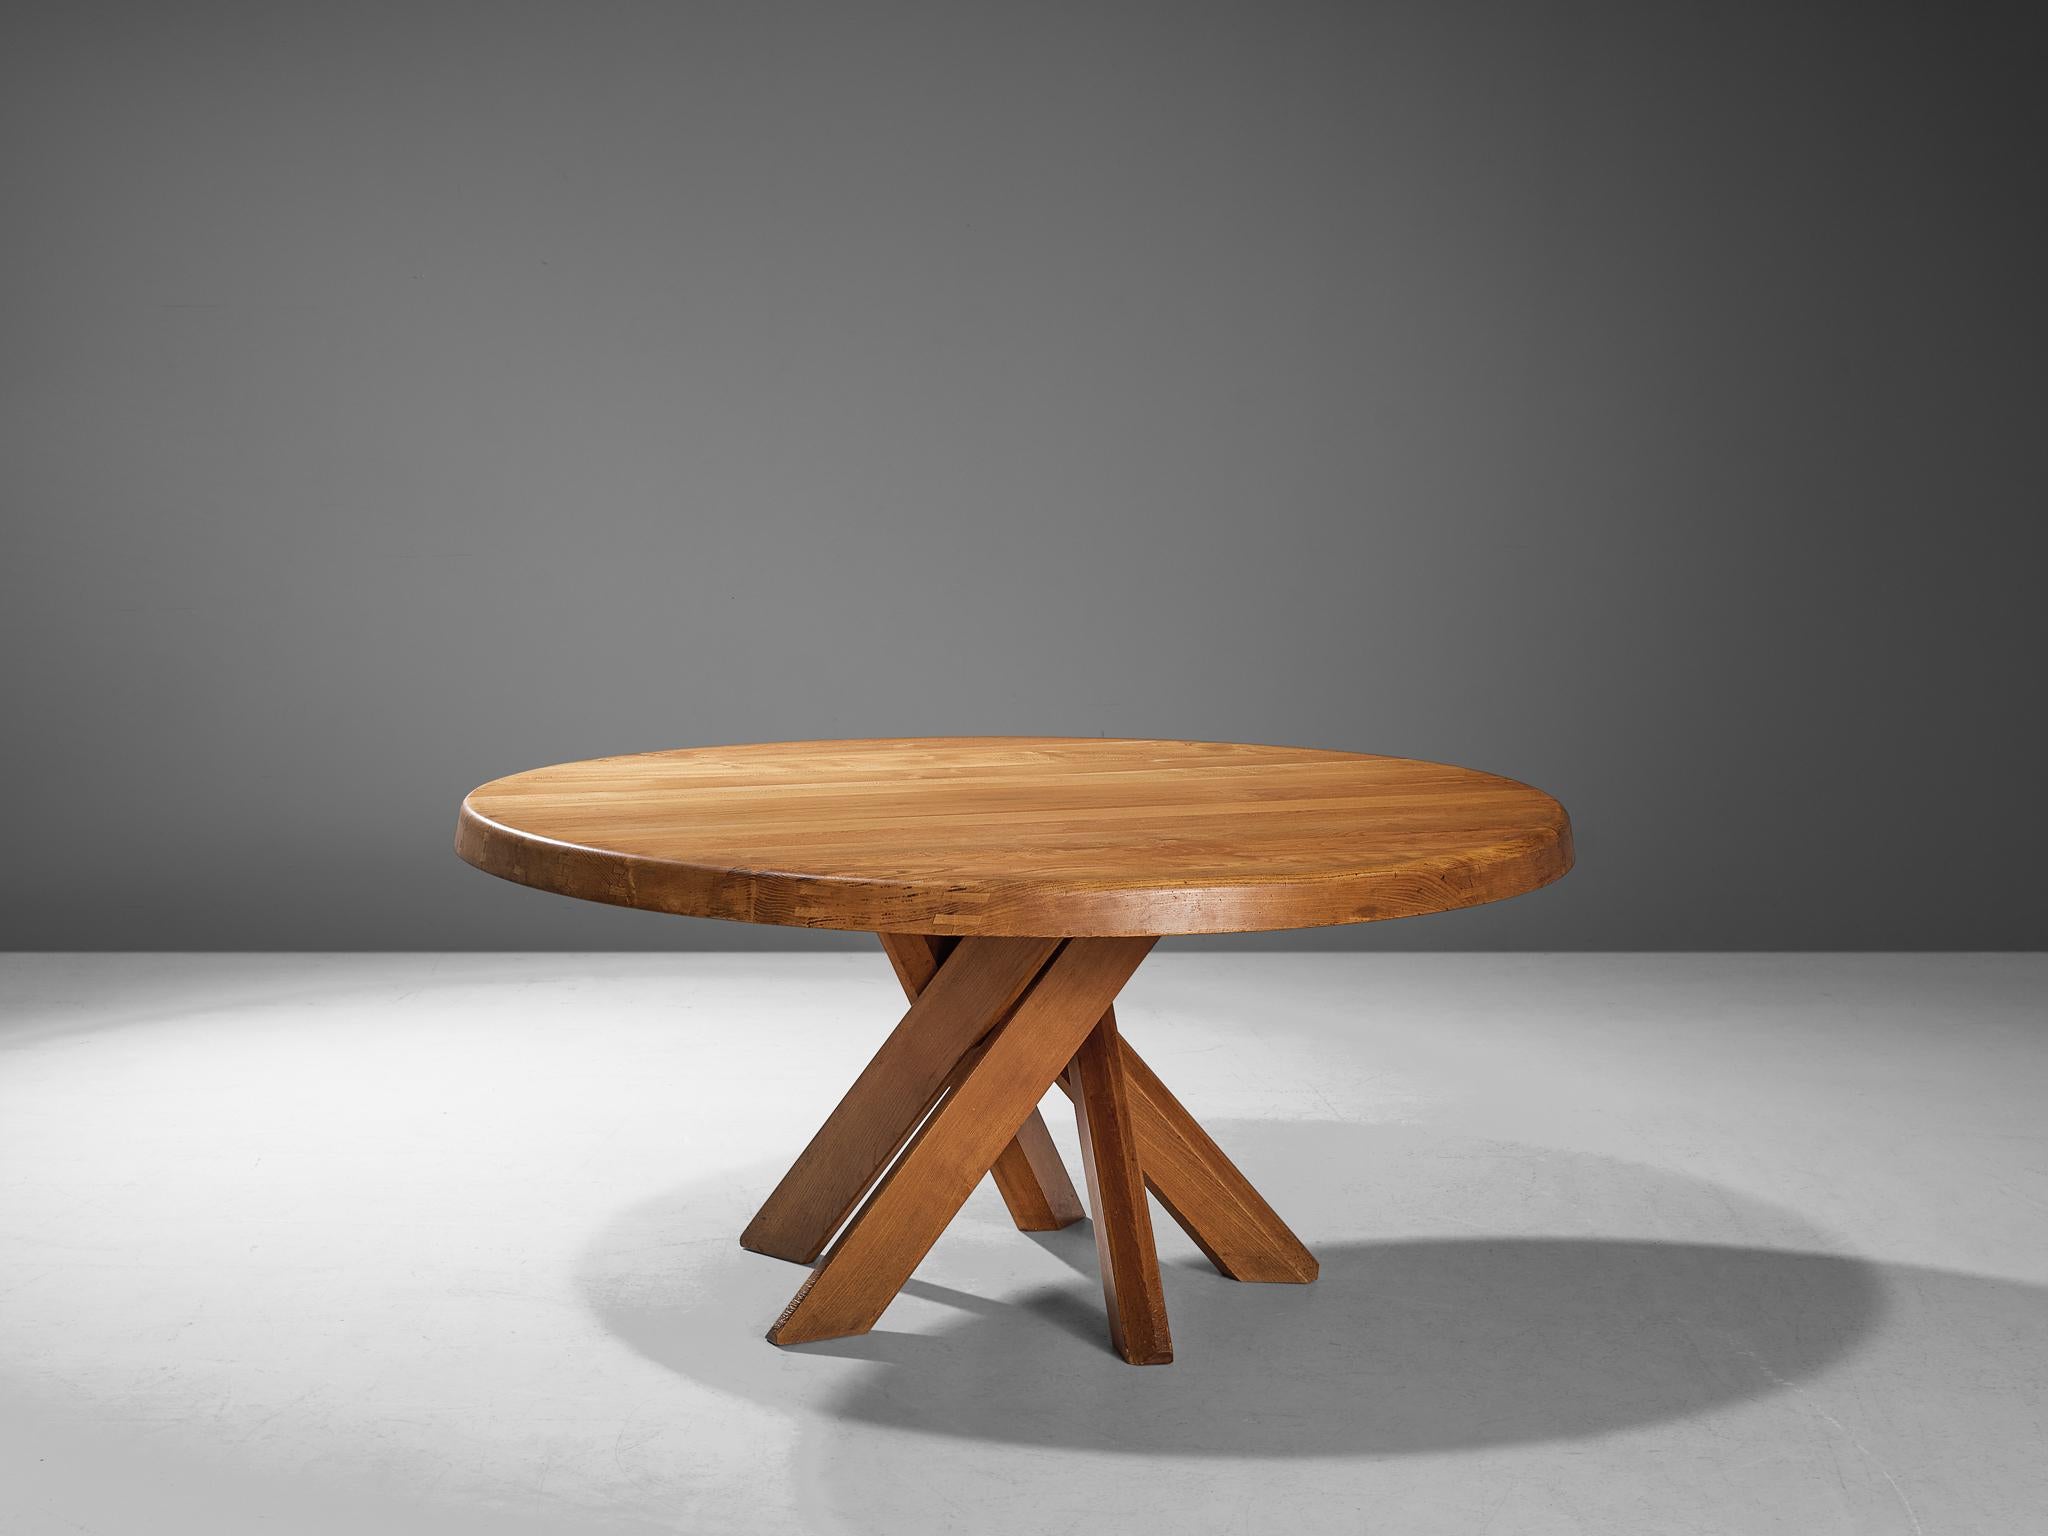 Pierre Chapo, dining table model 'T21E', elm, France, 1973

This round 'T21 E' dining table is designed by Pierre Chapo and its table top has a diameter of 160 cm (63 in). The shape of the base creates a very dynamic look. The perfectly made solid